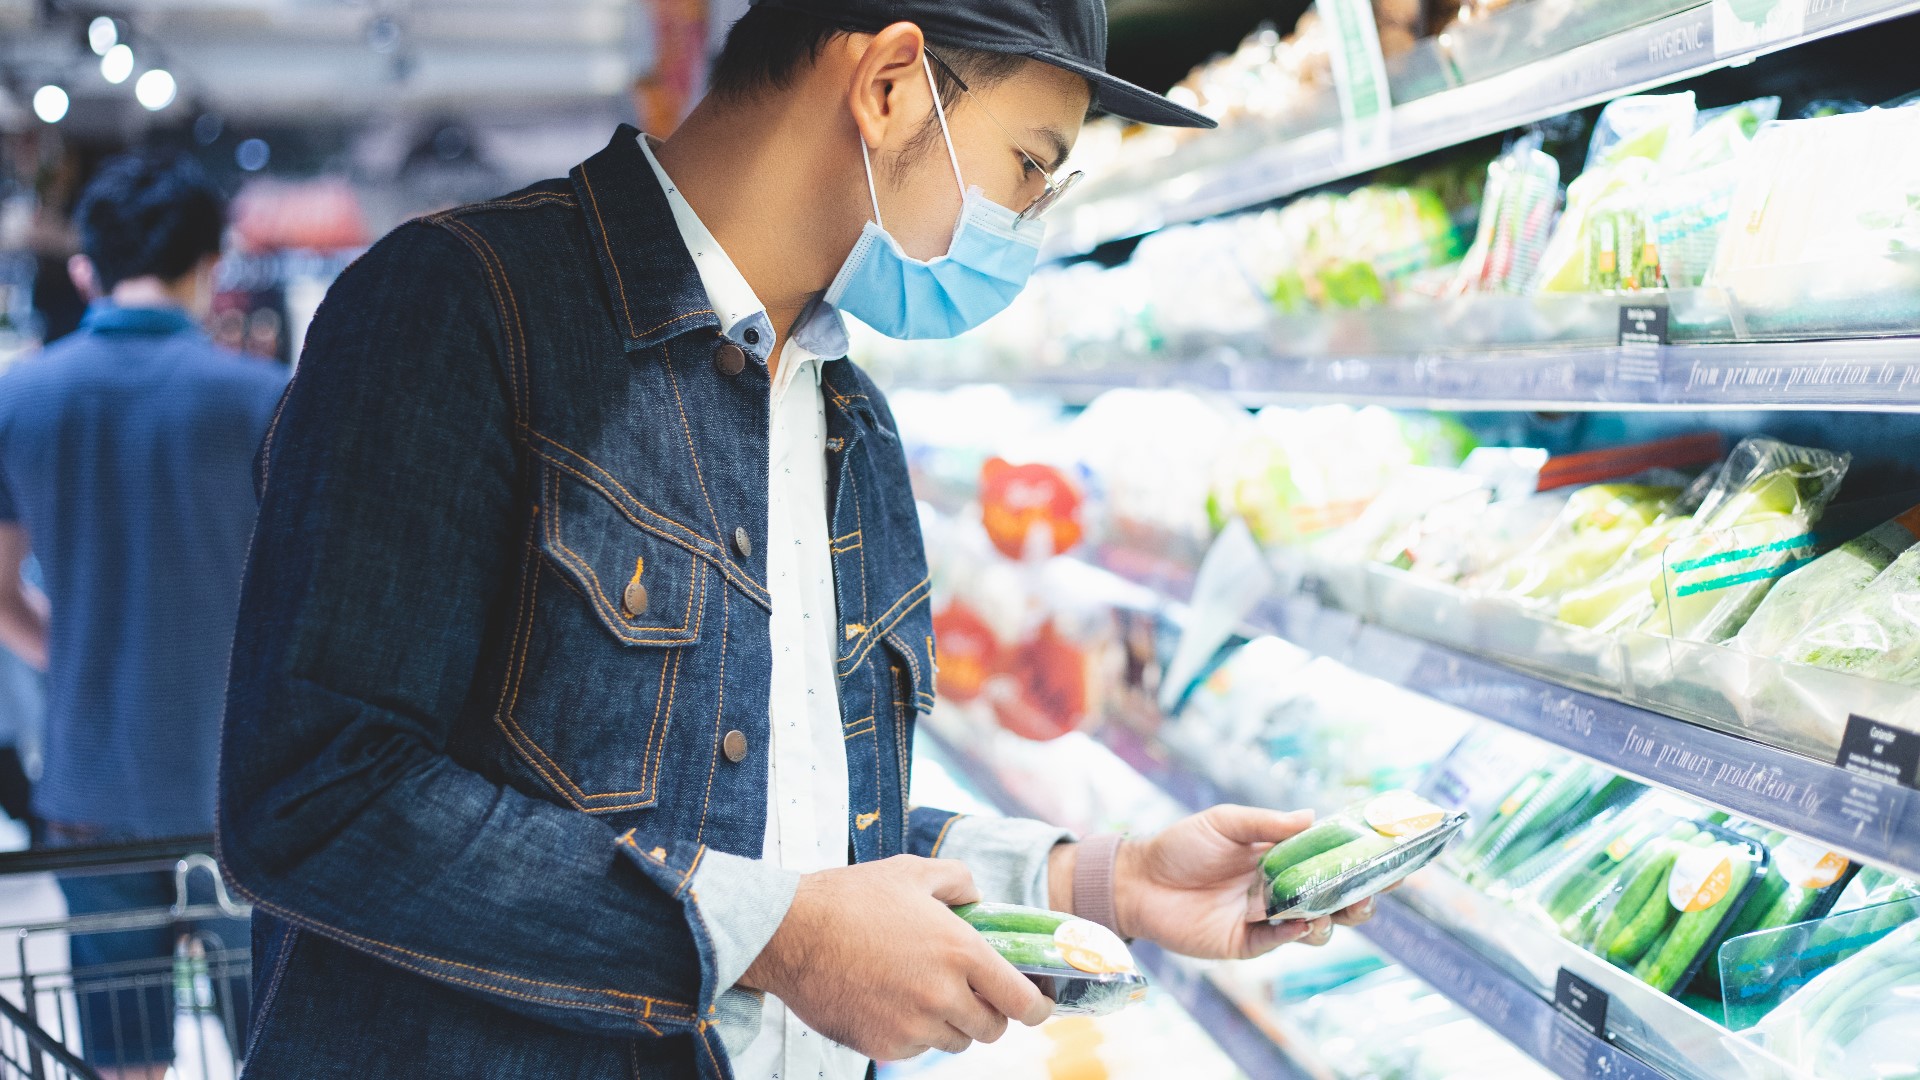 Retailers are bracing themselves for a potential surge in food stockpiling as the always busy holiday season ramps up alongside California’s fight against COVID-19.